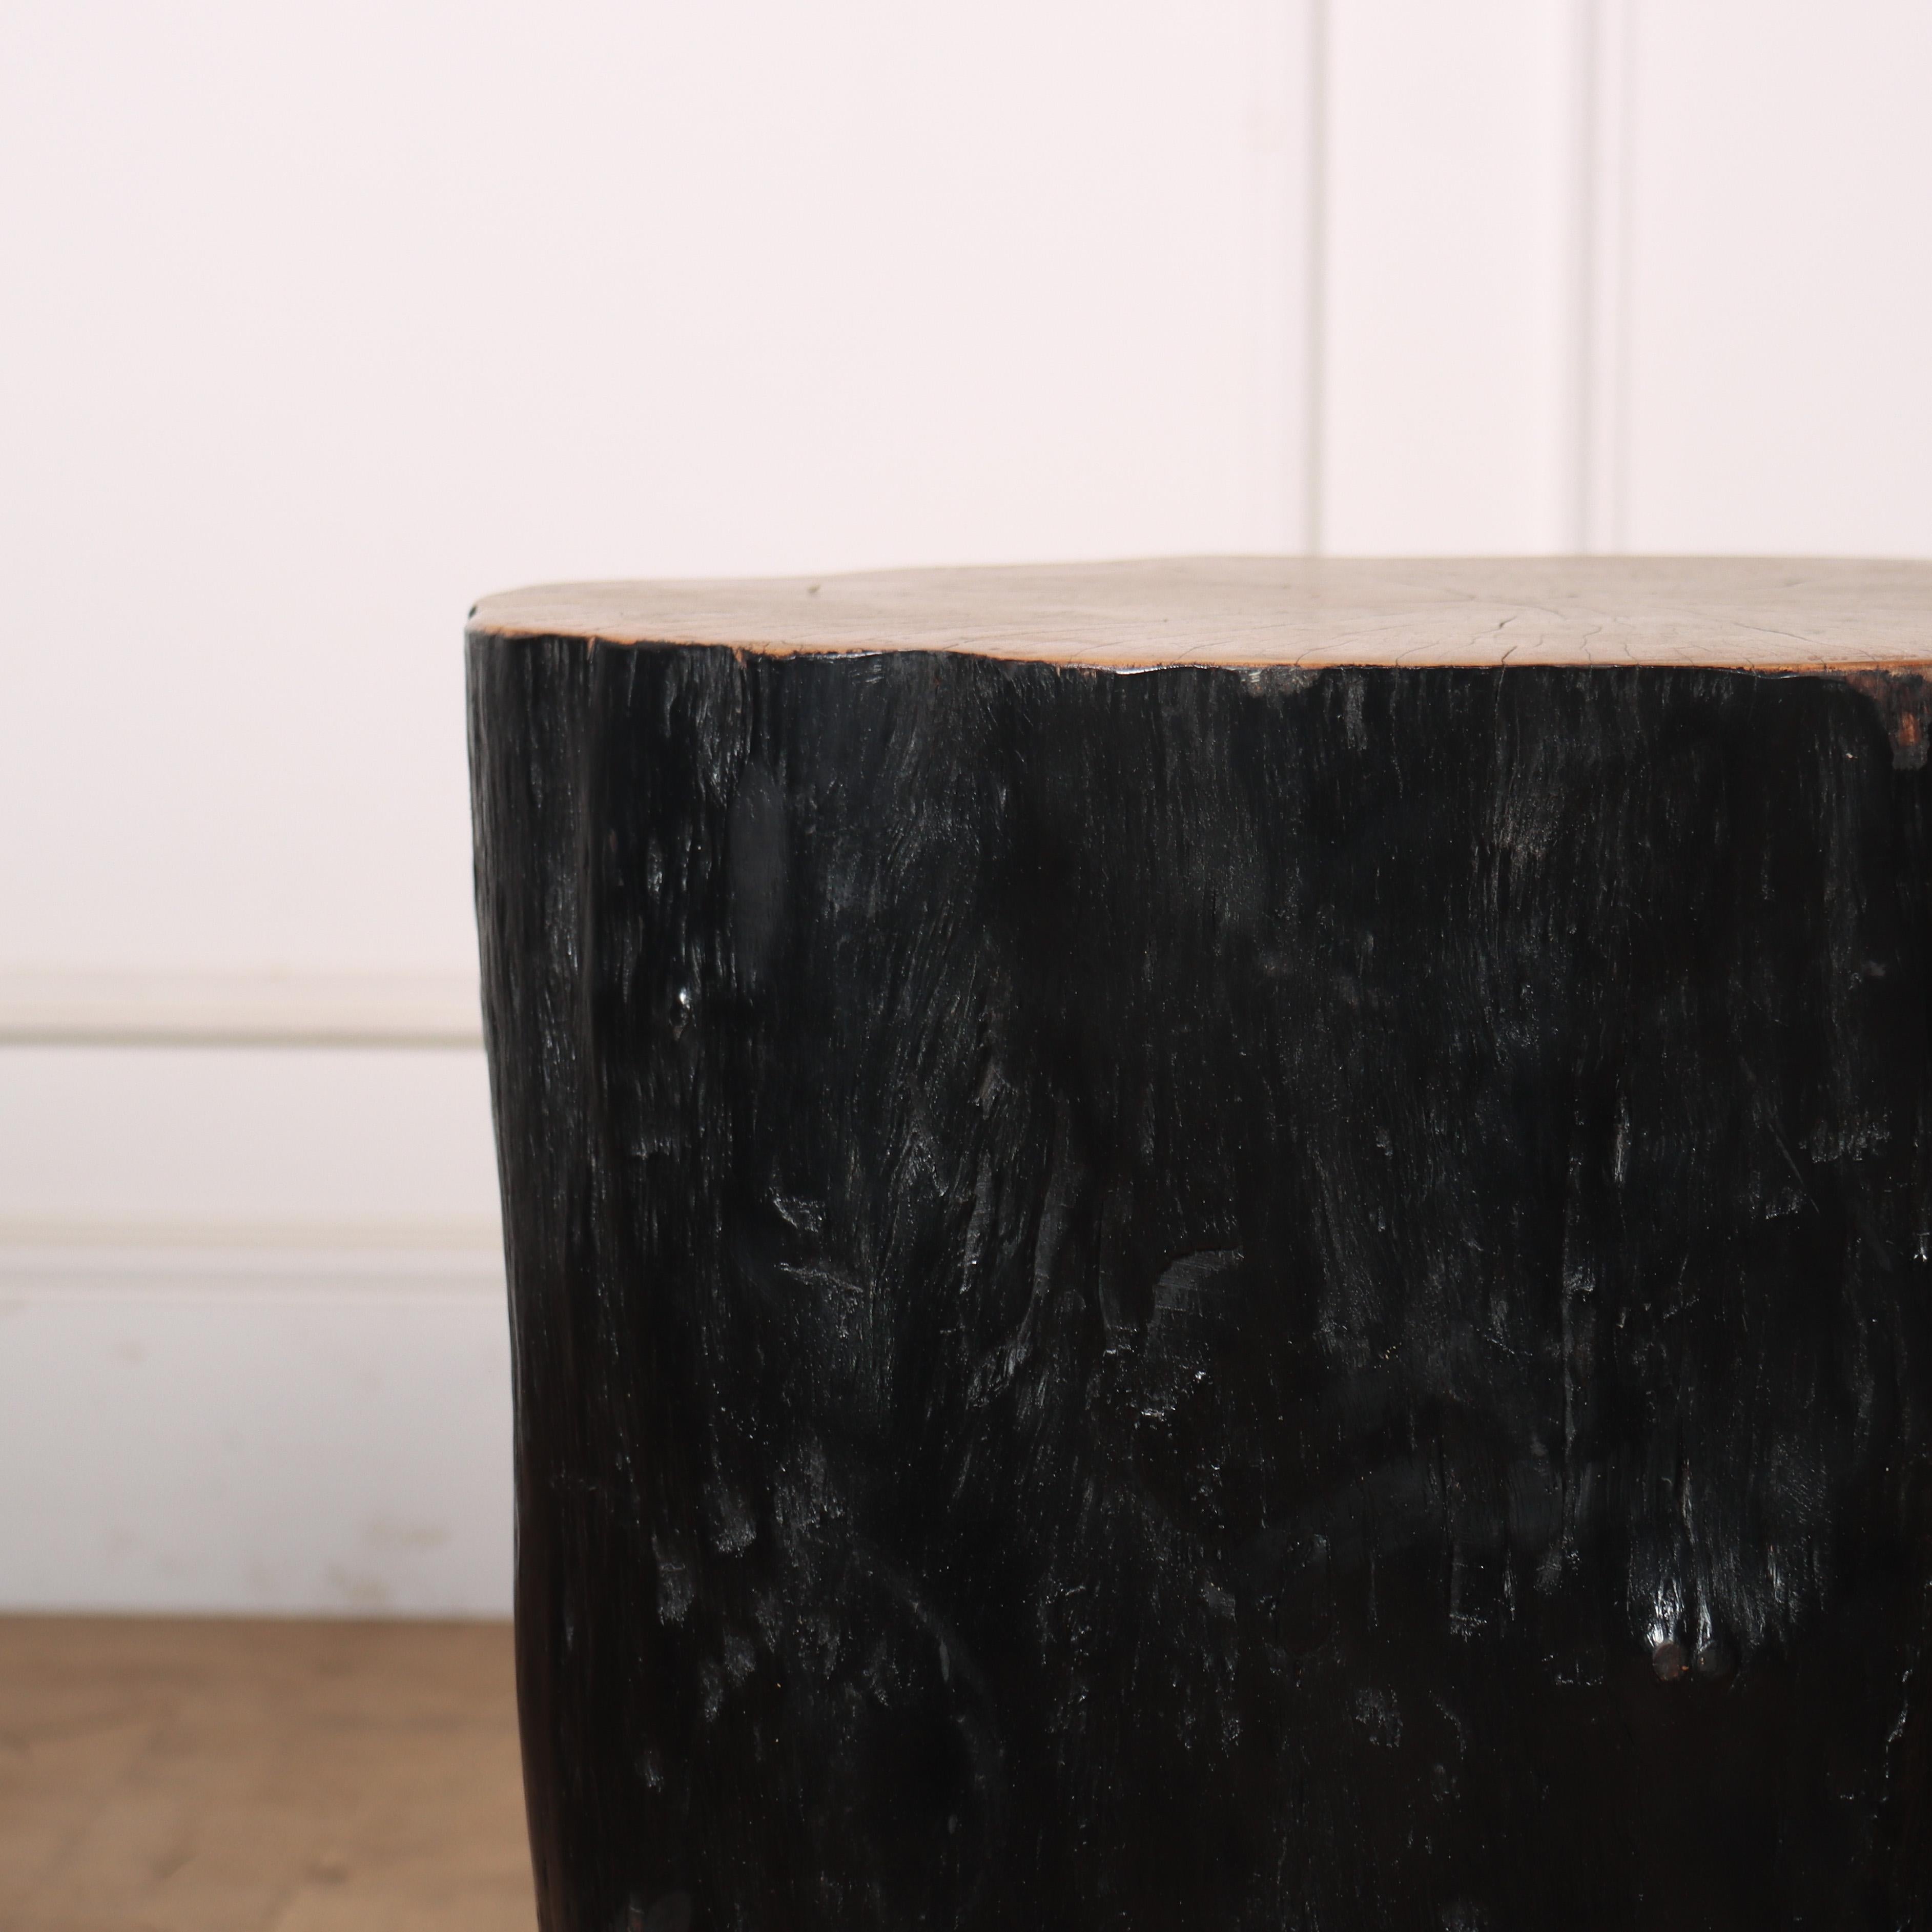 Primitive lychee side table. Hand carved and finished using a Japanese technique called Shou-Sugi Ban.

Reference: 8155

Dimensions
16 inches (41 cms) Wide
13.5 inches (34 cms) Deep
19.5 inches (50 cms) High